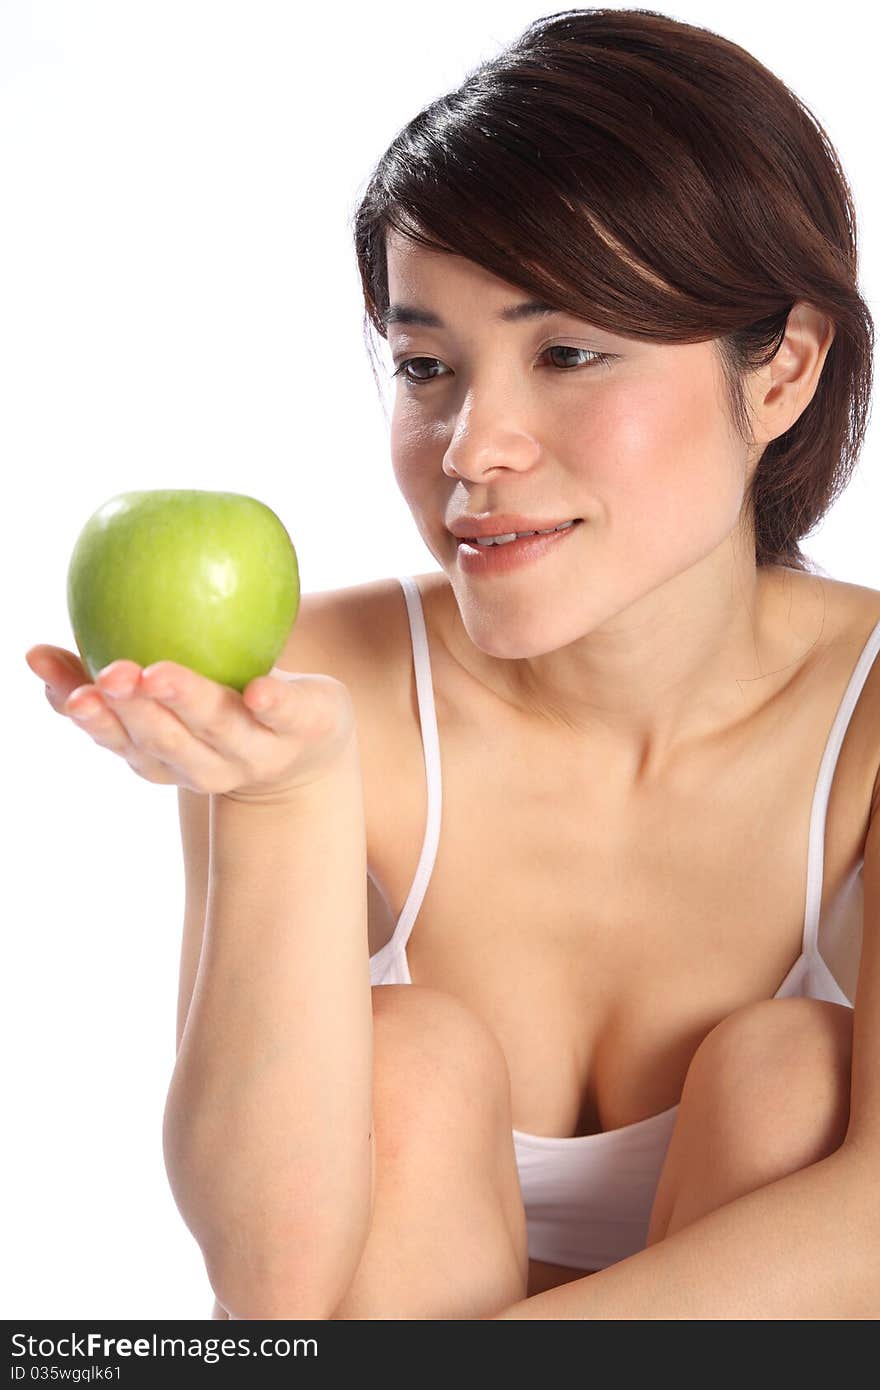 Beautiful young Japanese girl, wearing white sports underwear, sitting down holding a green apple. Beautiful young Japanese girl, wearing white sports underwear, sitting down holding a green apple.